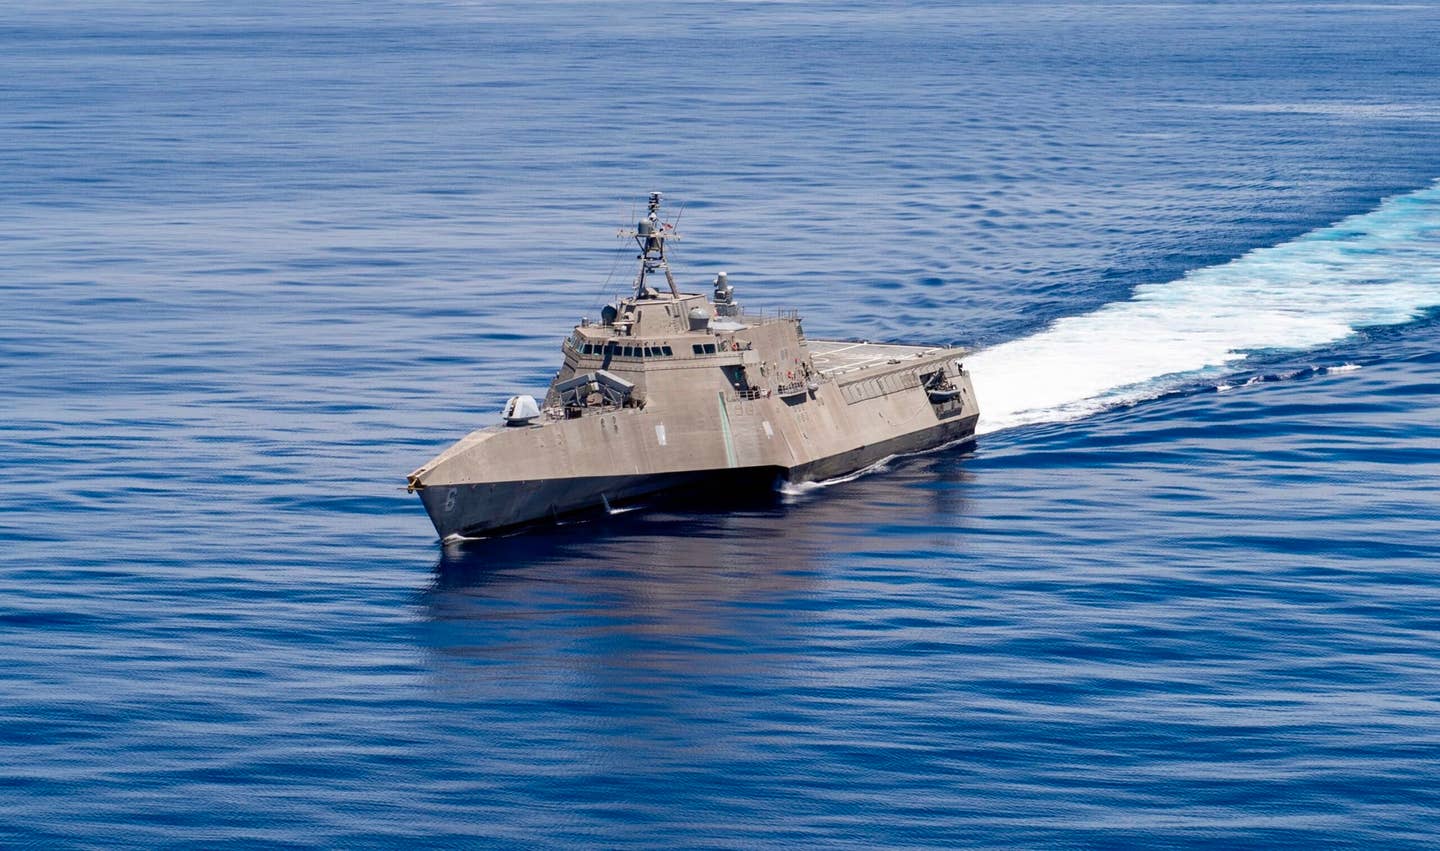 The <em>Independence</em> class USS <em>Jackson</em> (LCS 6) transits the Pacific Ocean, August 19, 2021. <em>U.S. Navy photo by Mass Communication Specialist 3rd Class Kelsey S. Culbertson/Released</em>